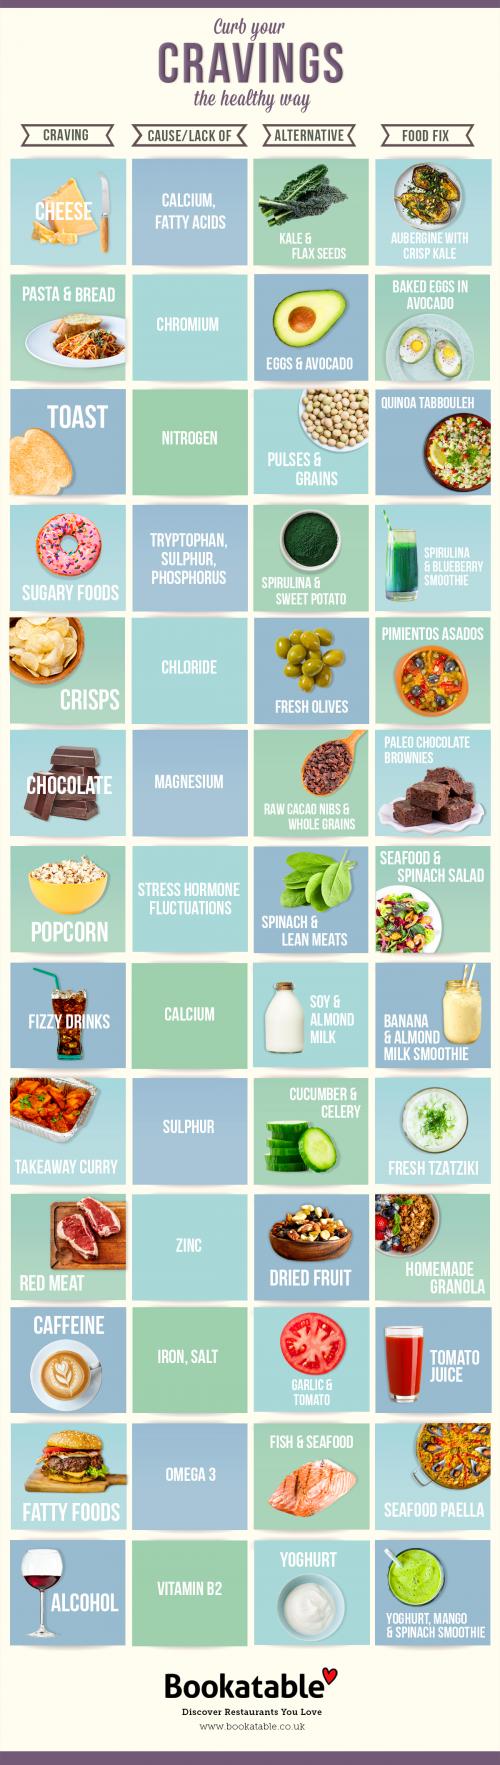 Curb Your Cravings The Healthy Way - Infographic